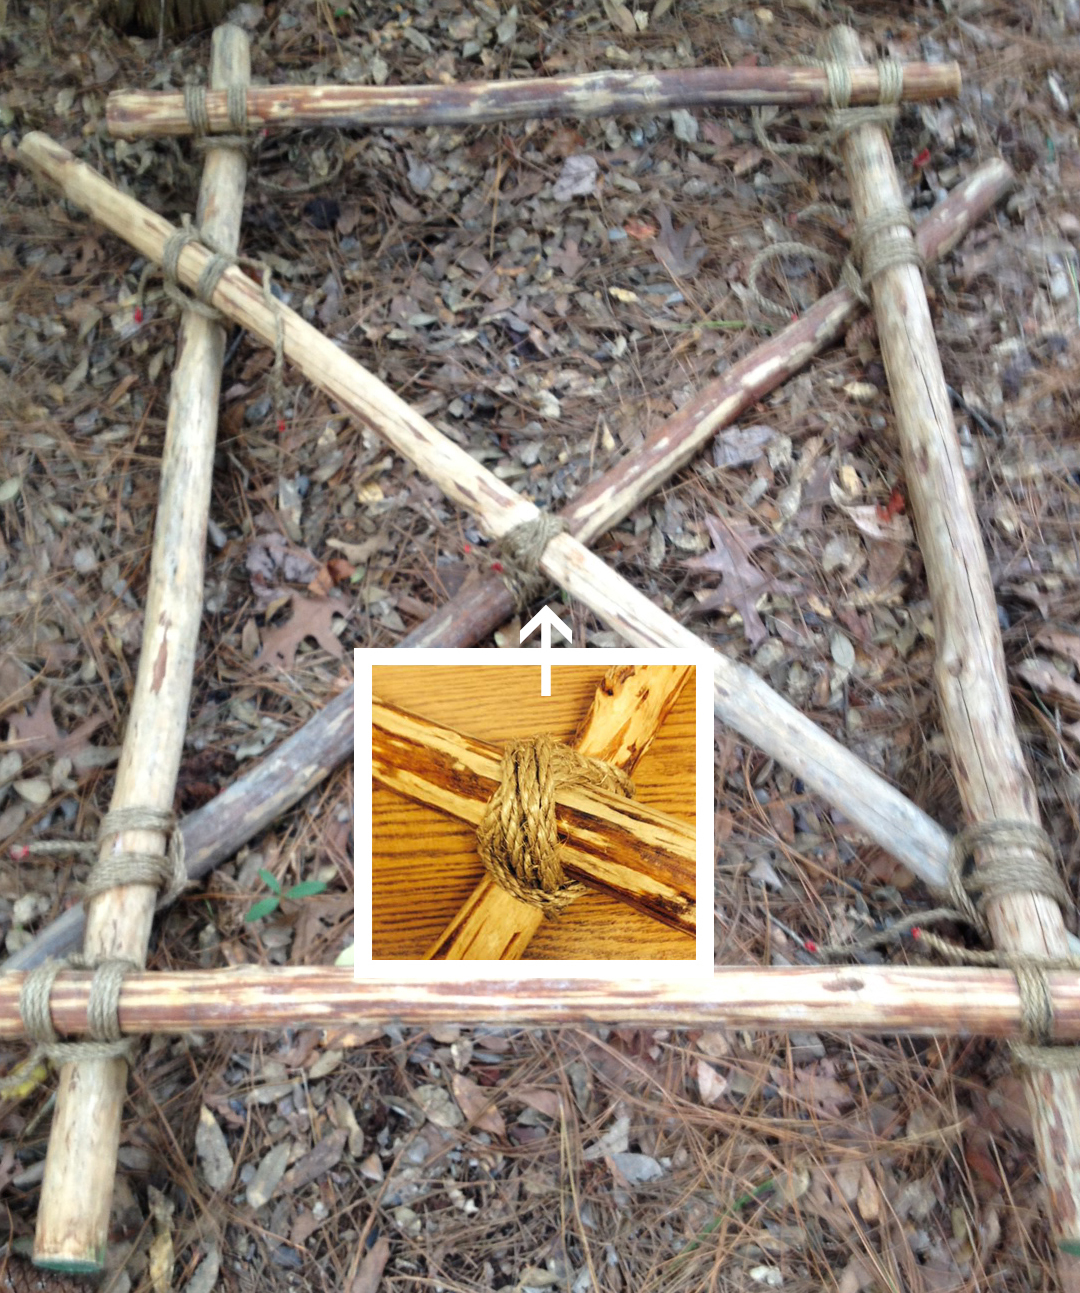 Pdf Of Boy Scout Tripod Lashing With Table Attached